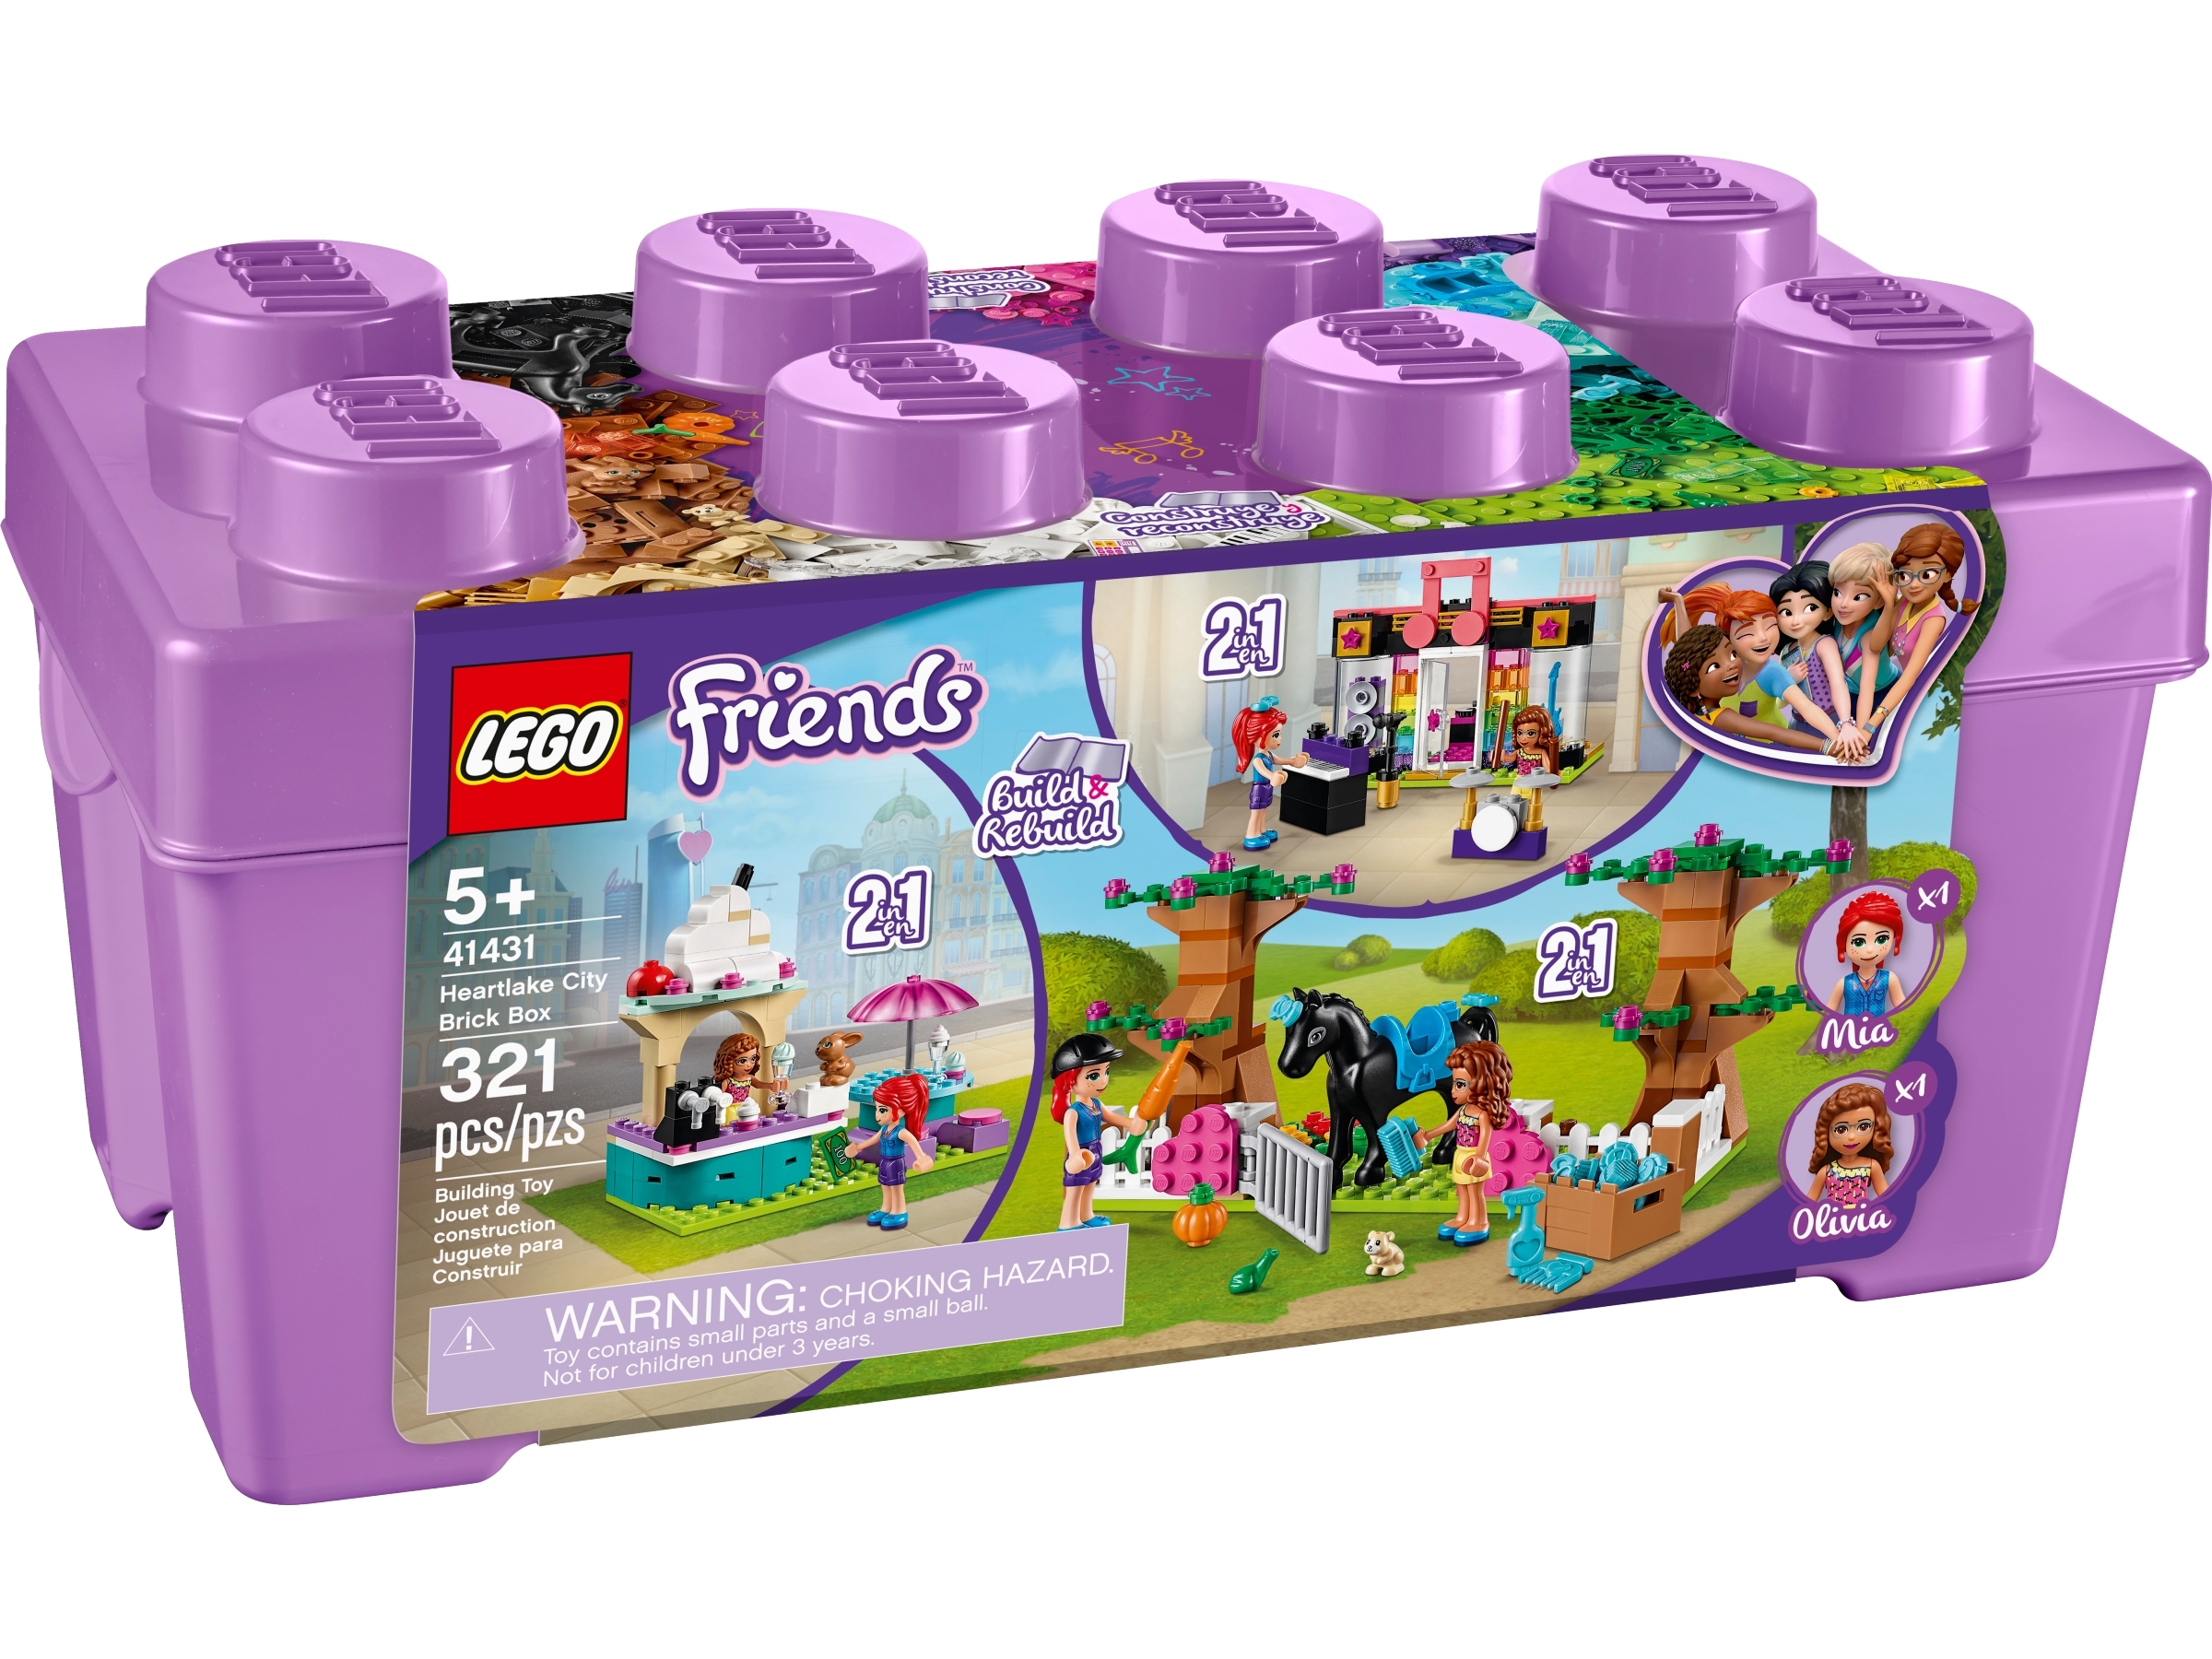 Heartlake City Brick Box 41431 | Friends | Buy online at the Official LEGO®  Shop US